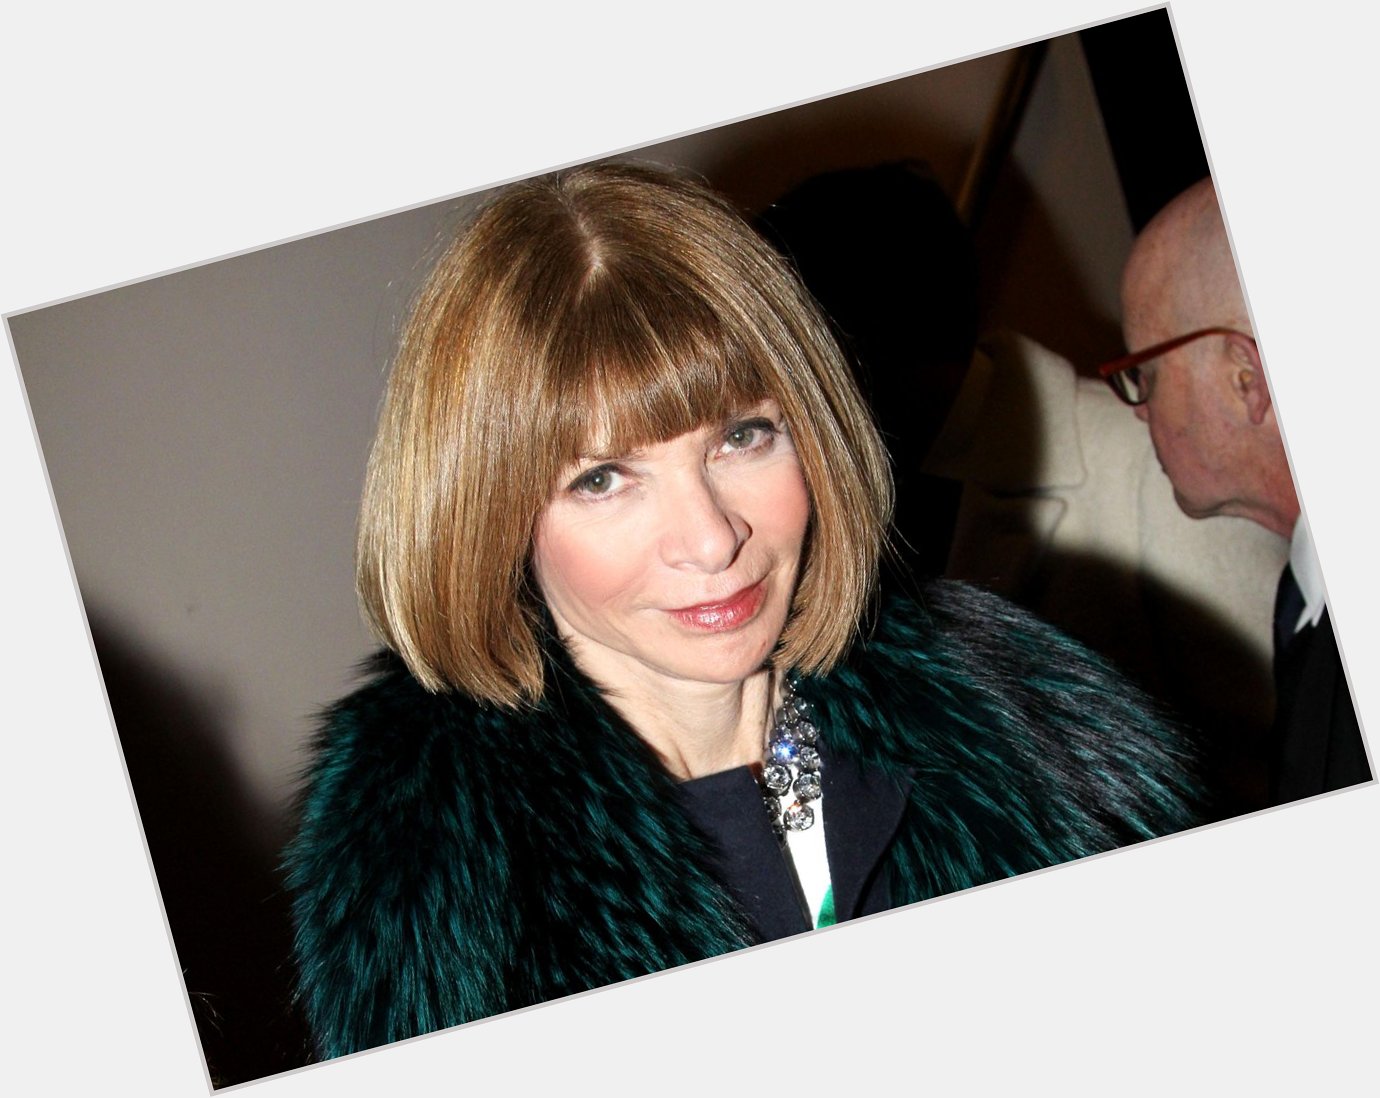 Happy Birthday Anna Wintour! Here is "11 Times She Had No Time For Basics." via 